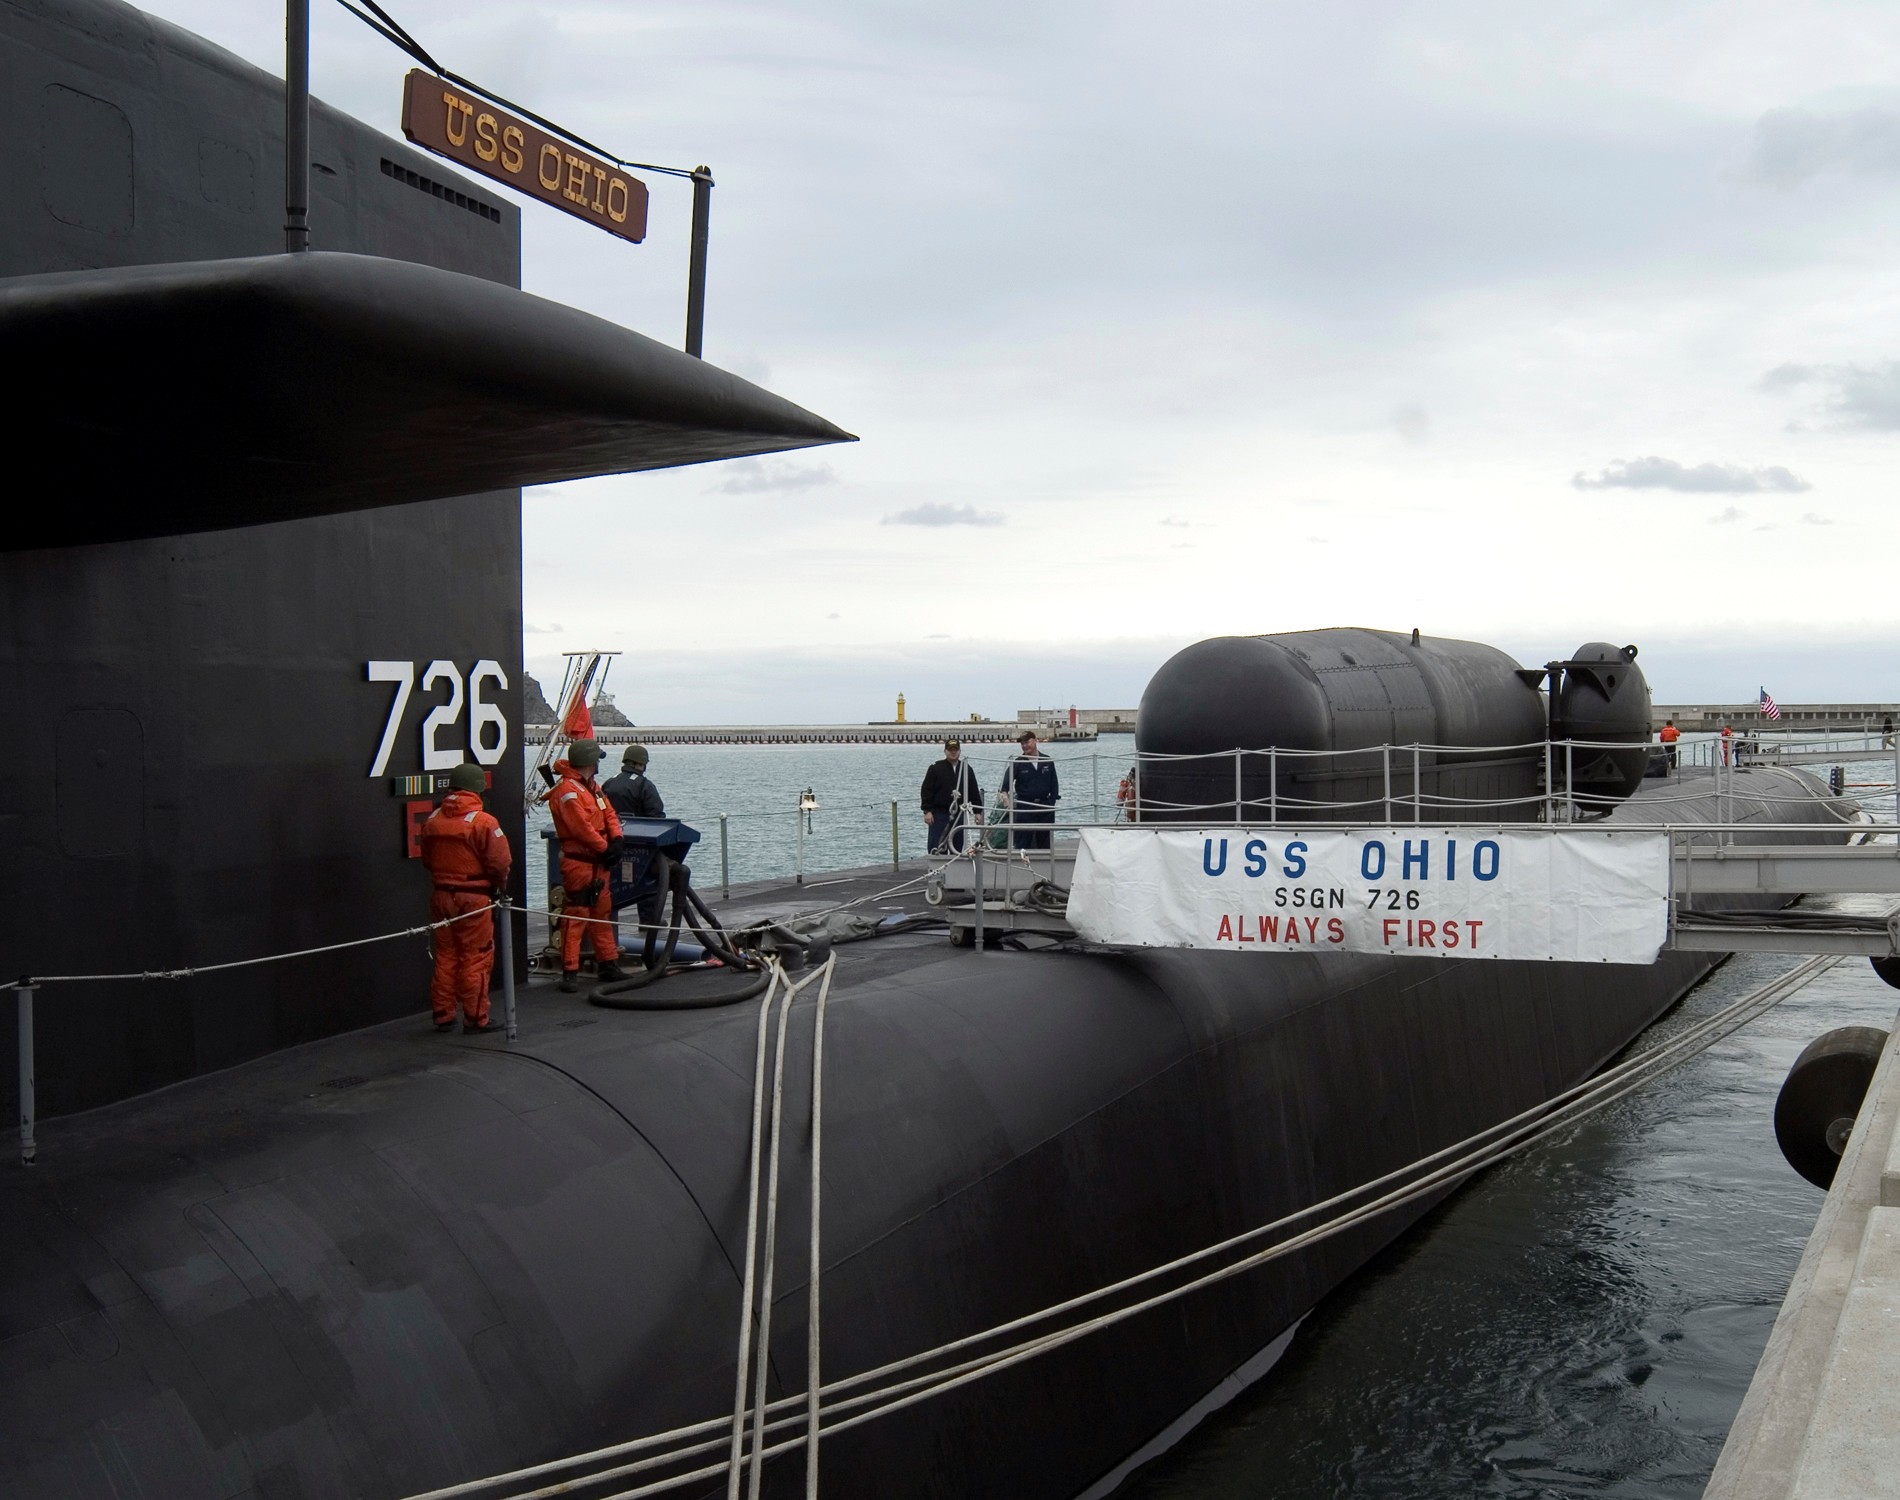 ssgn-726 uss ohio guided missile submarine us navy 2008 43